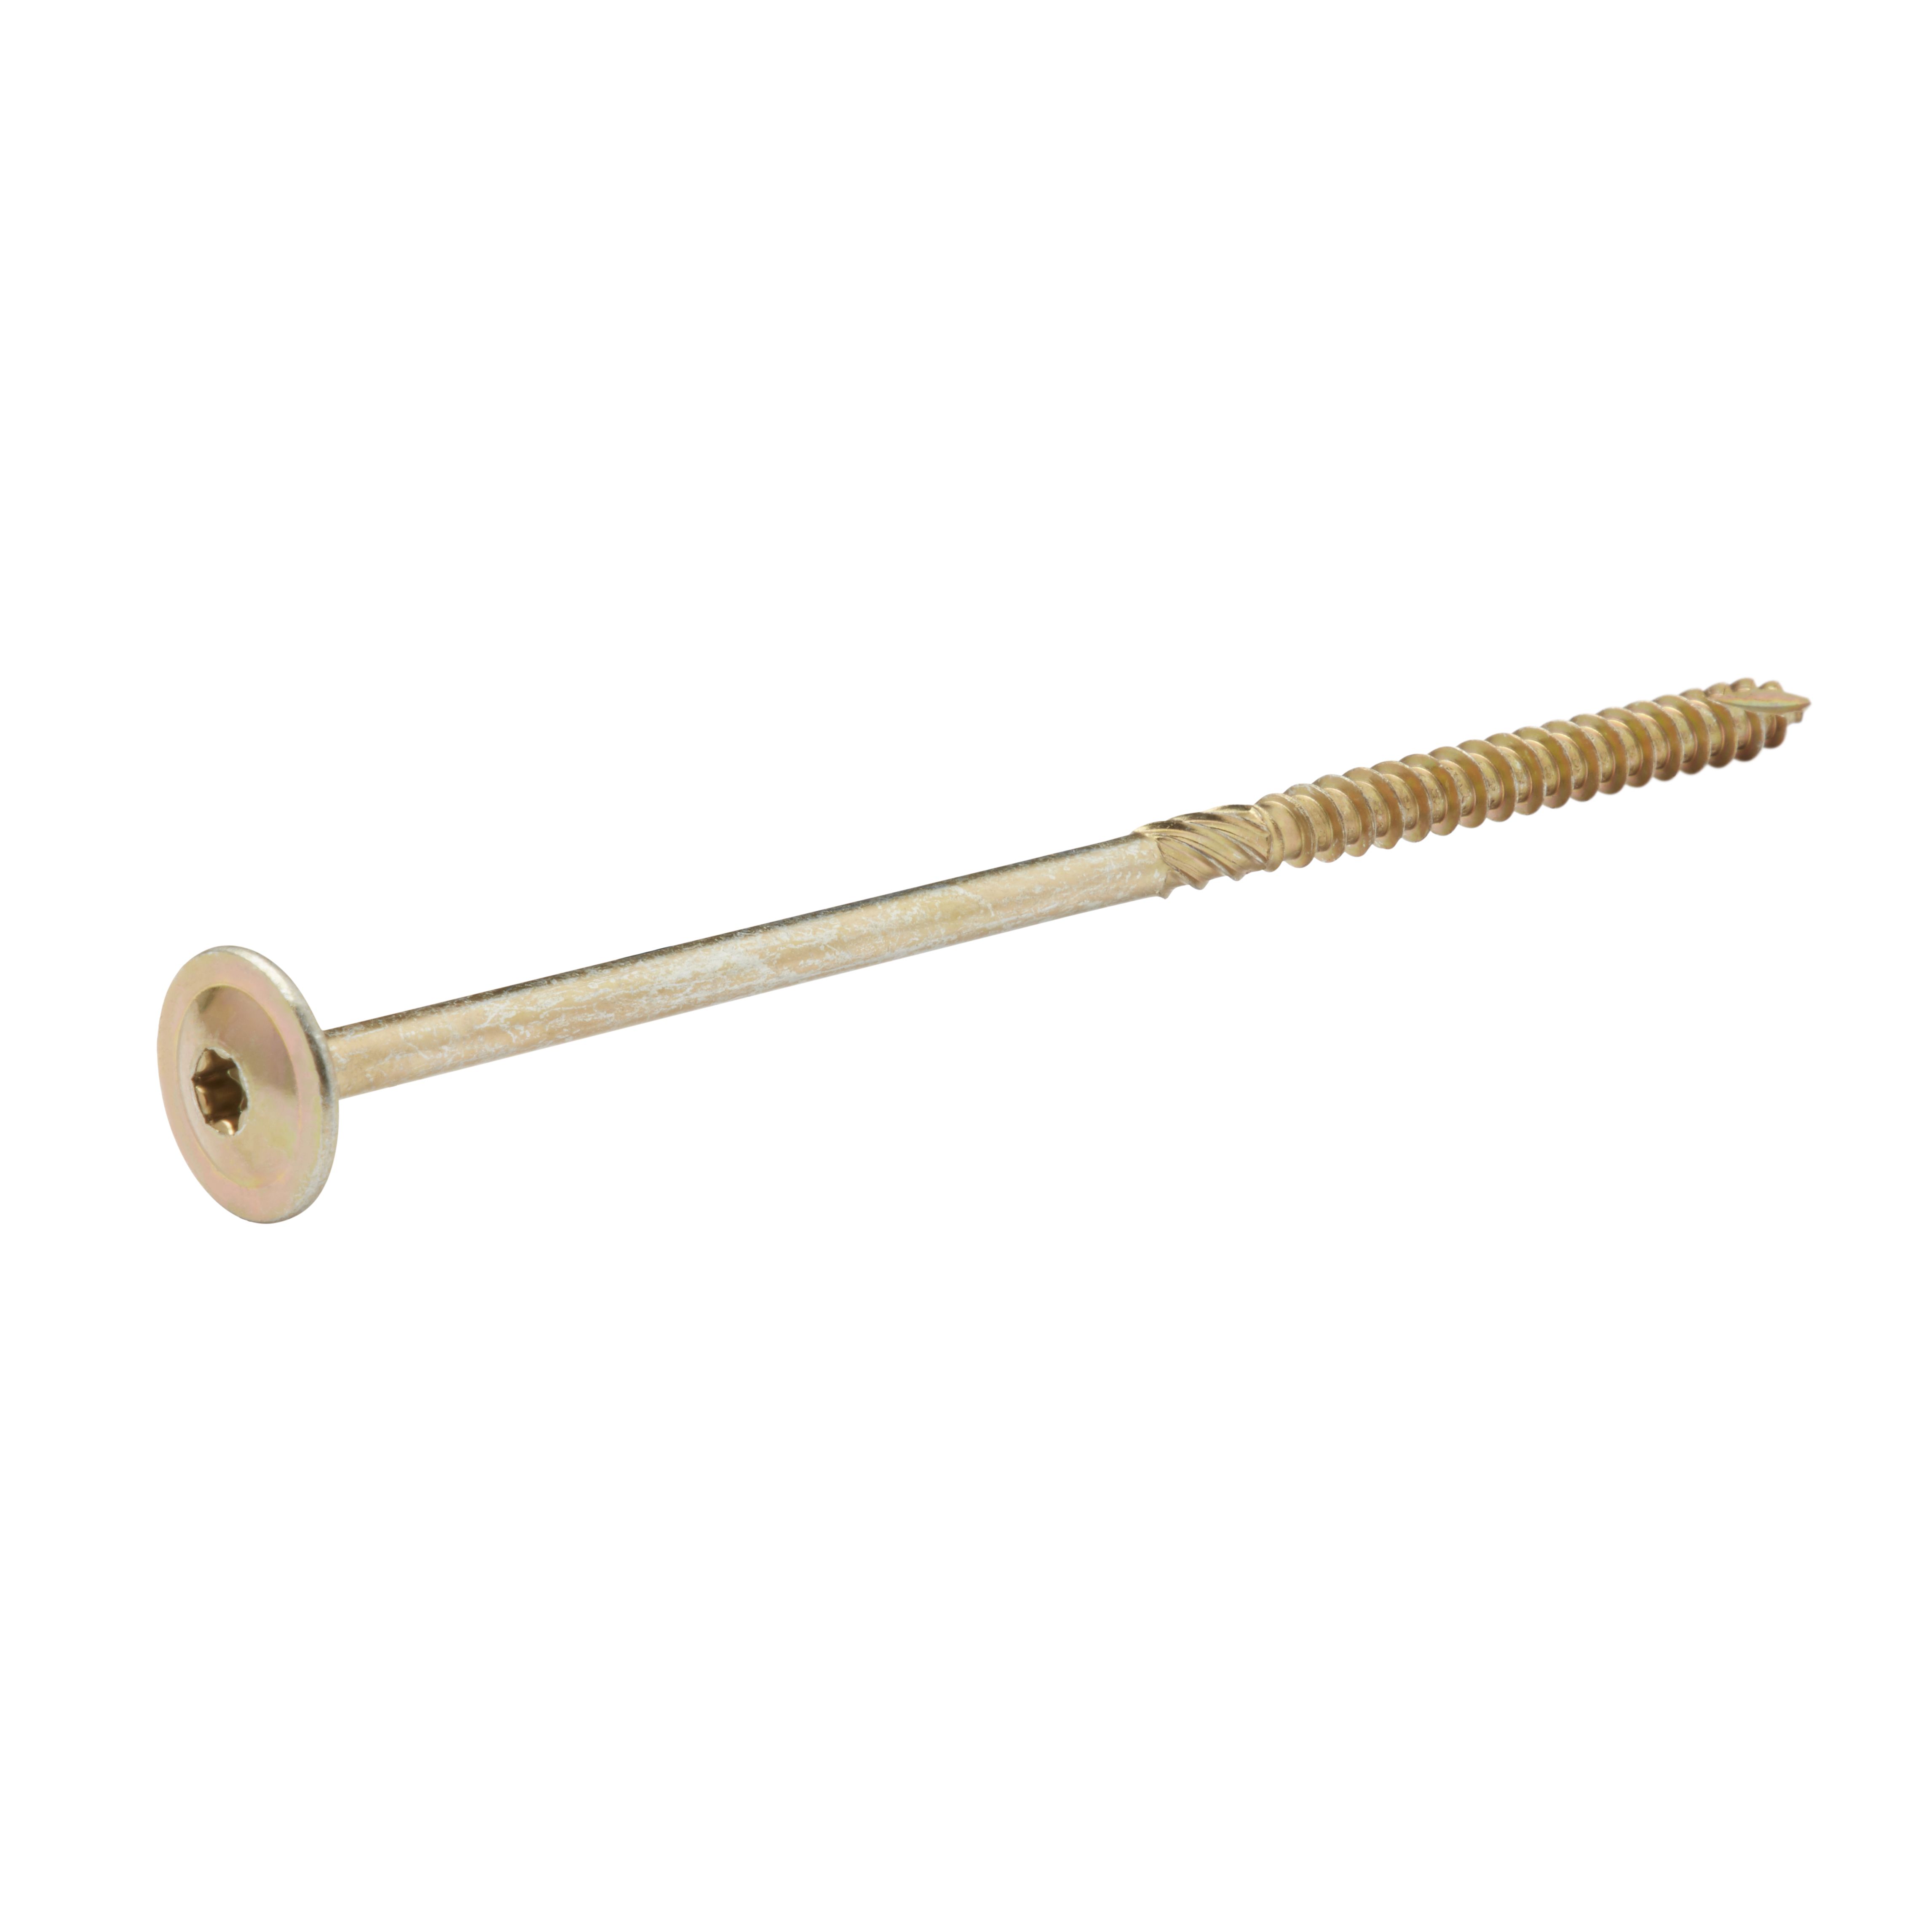 Diall Wafer Yellow-passivated Carbon steel Timber frame screw (Dia)8mm (L)180mm